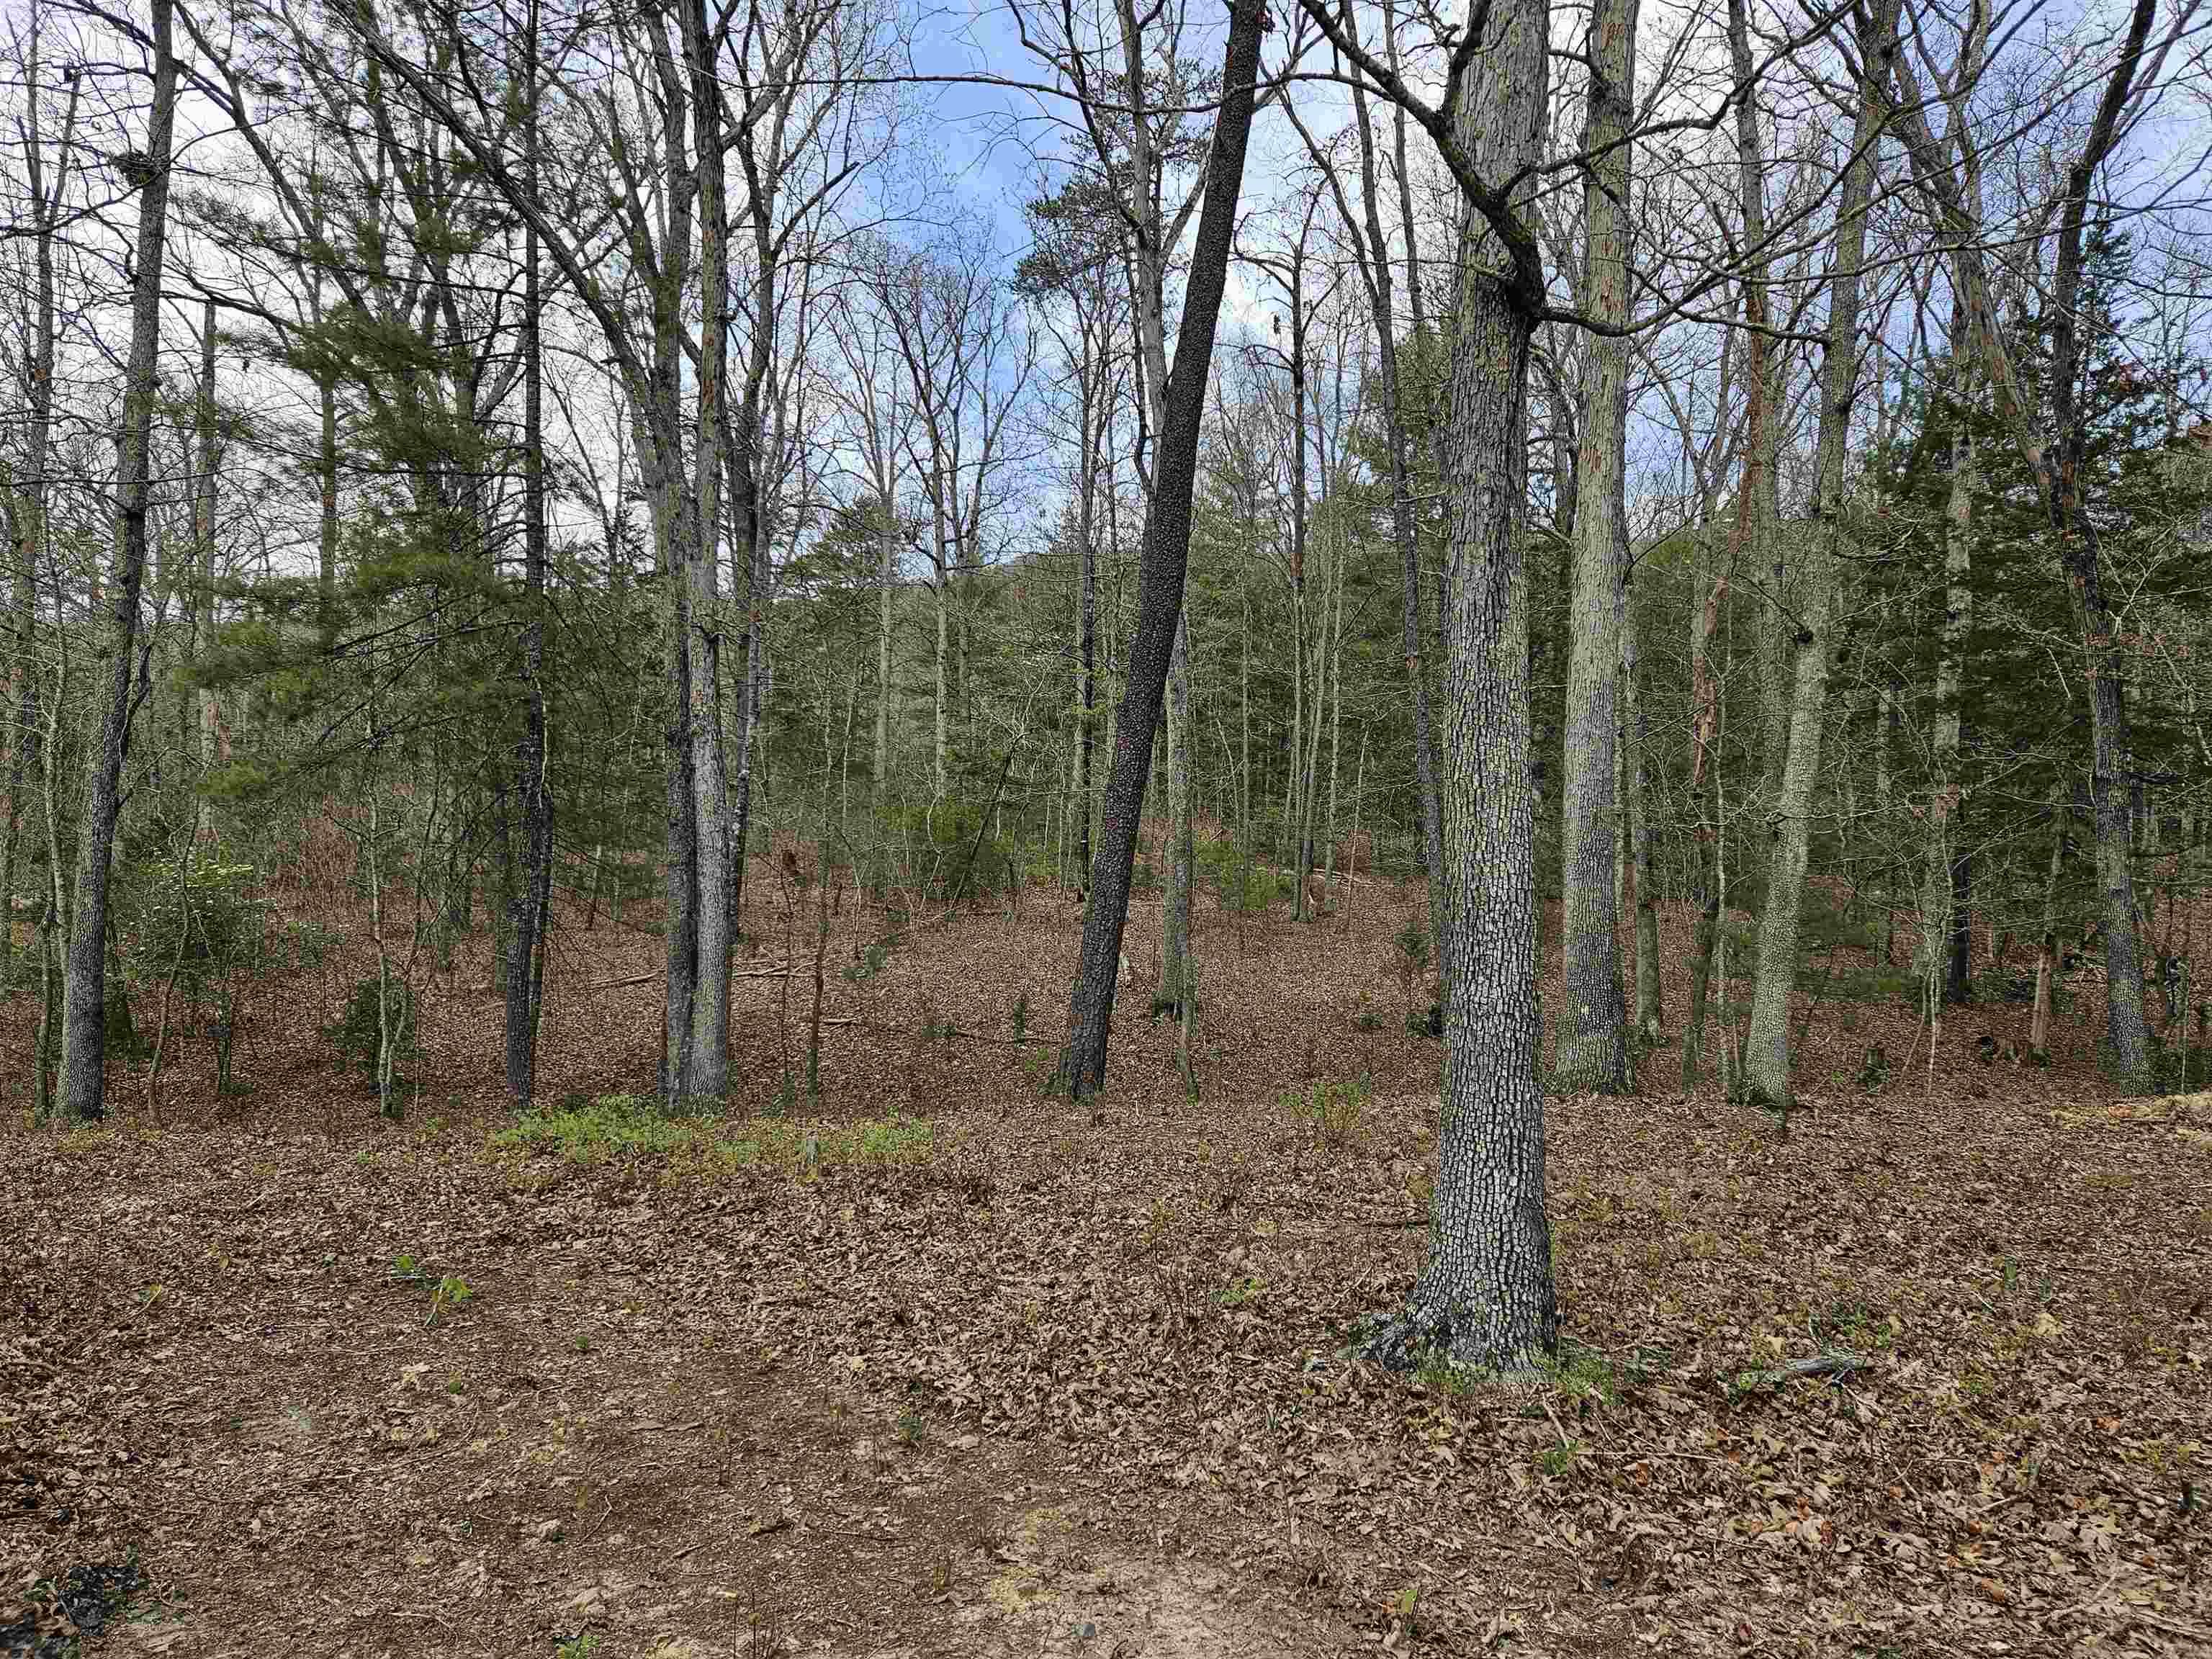 Discover 7.59 acres of pristine woodland with breathtaking mountain views. Conveniently located near Christiansburg, Blacksburg, and Roanoke, this secluded property offers multiple home sites. Perked and part of a homeowners association, it's the perfect canvas for your dream home.